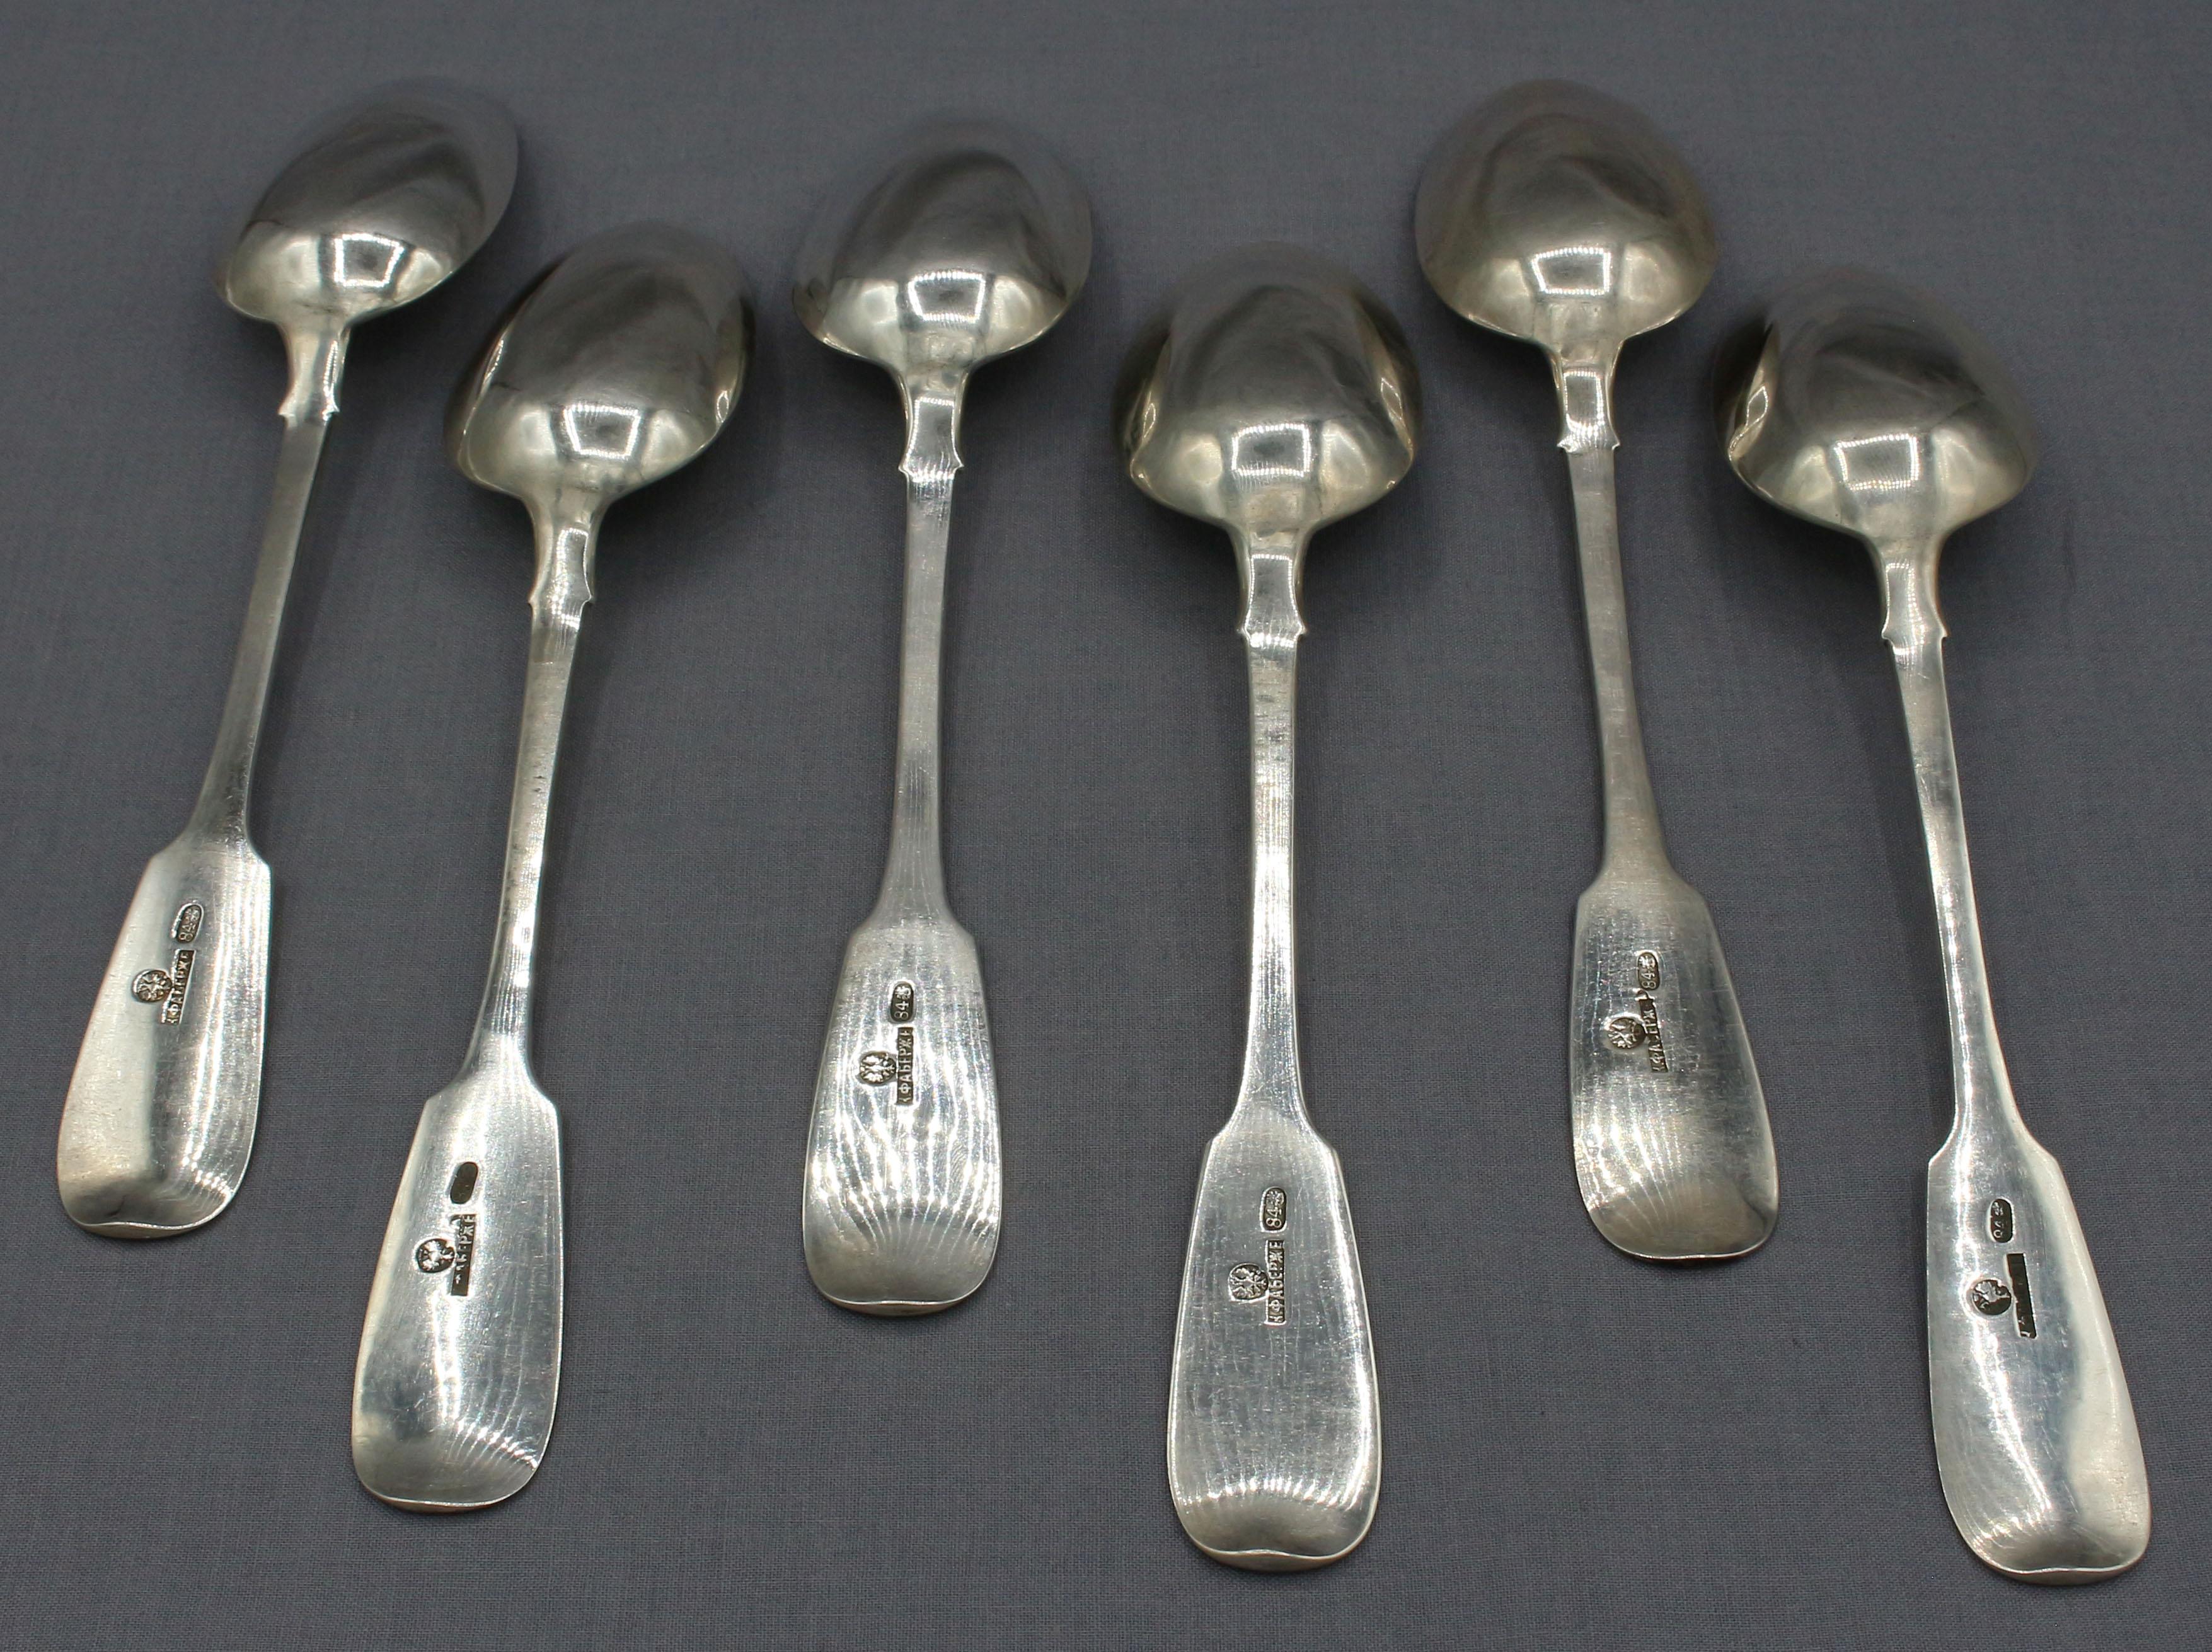 Set of 6 Faberge 84 zolotniks (.875) standard silver tablespoons, circa 1880. A splendid set, marks for their Moscow store. The Imperial Warrant double-headed eagle also is clear on each piece above Faberge's name. Fiddleback pattern popular from